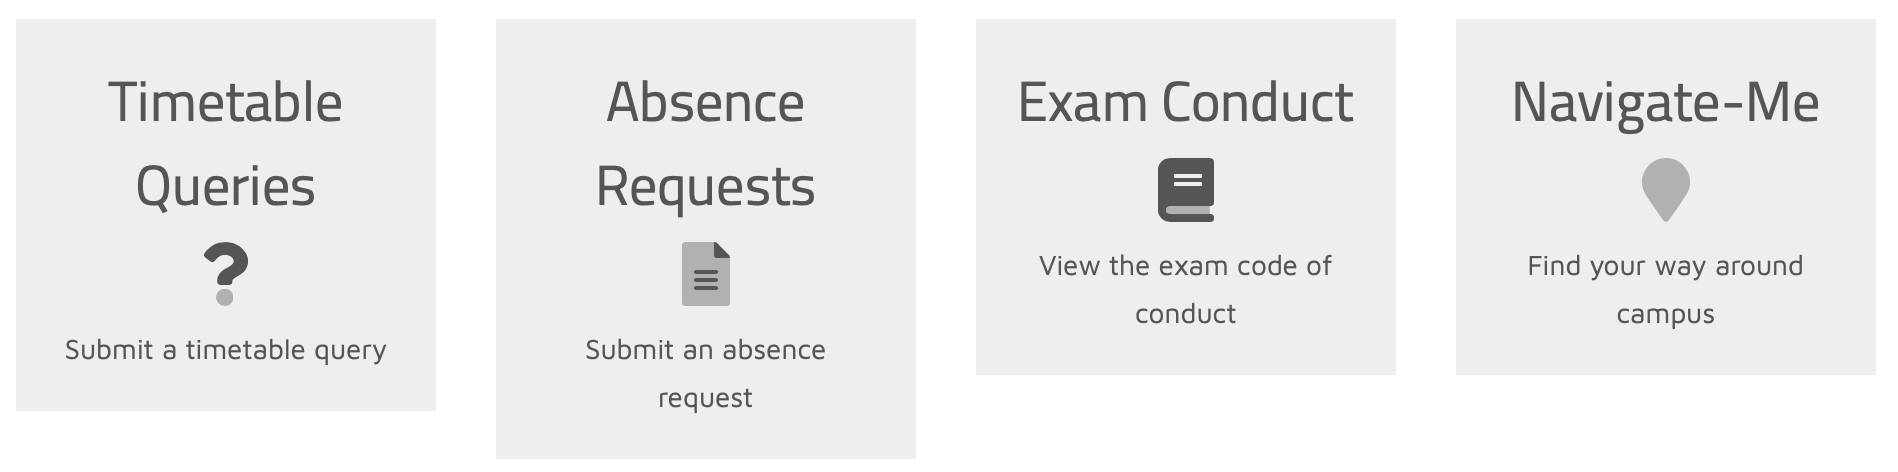 The options on the timetable website, including timetable queries, absence requests, exam conduct, and navigate-me